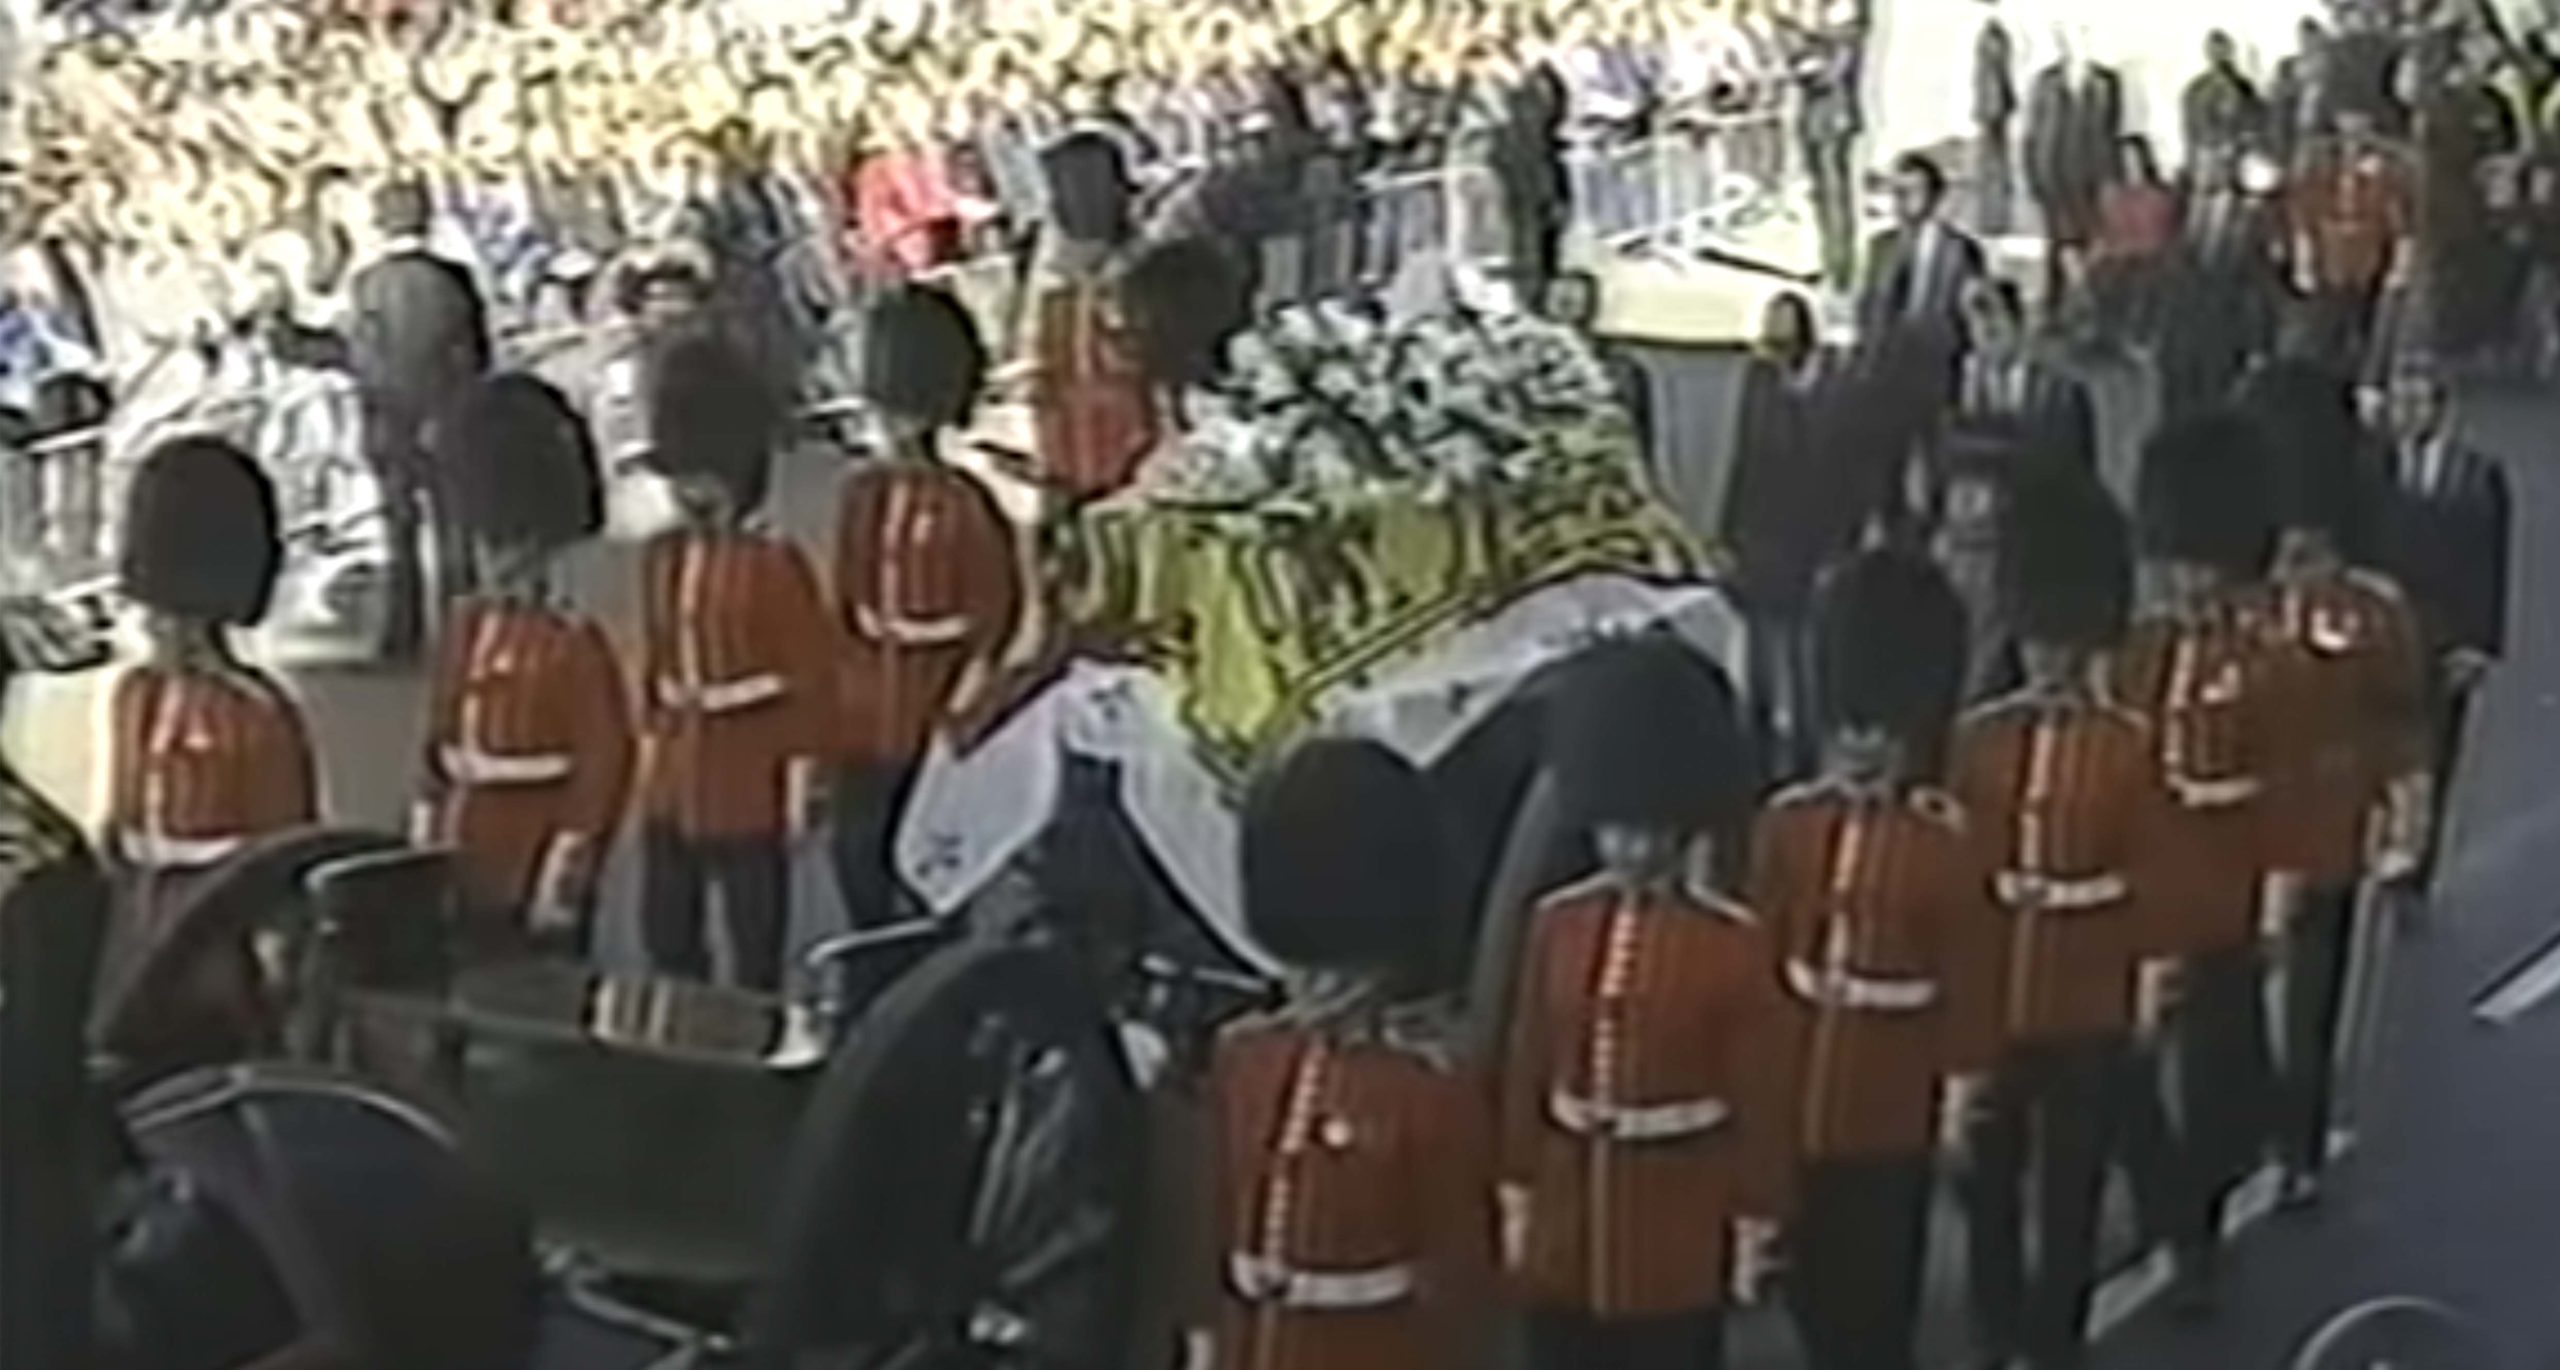 Diana funeral